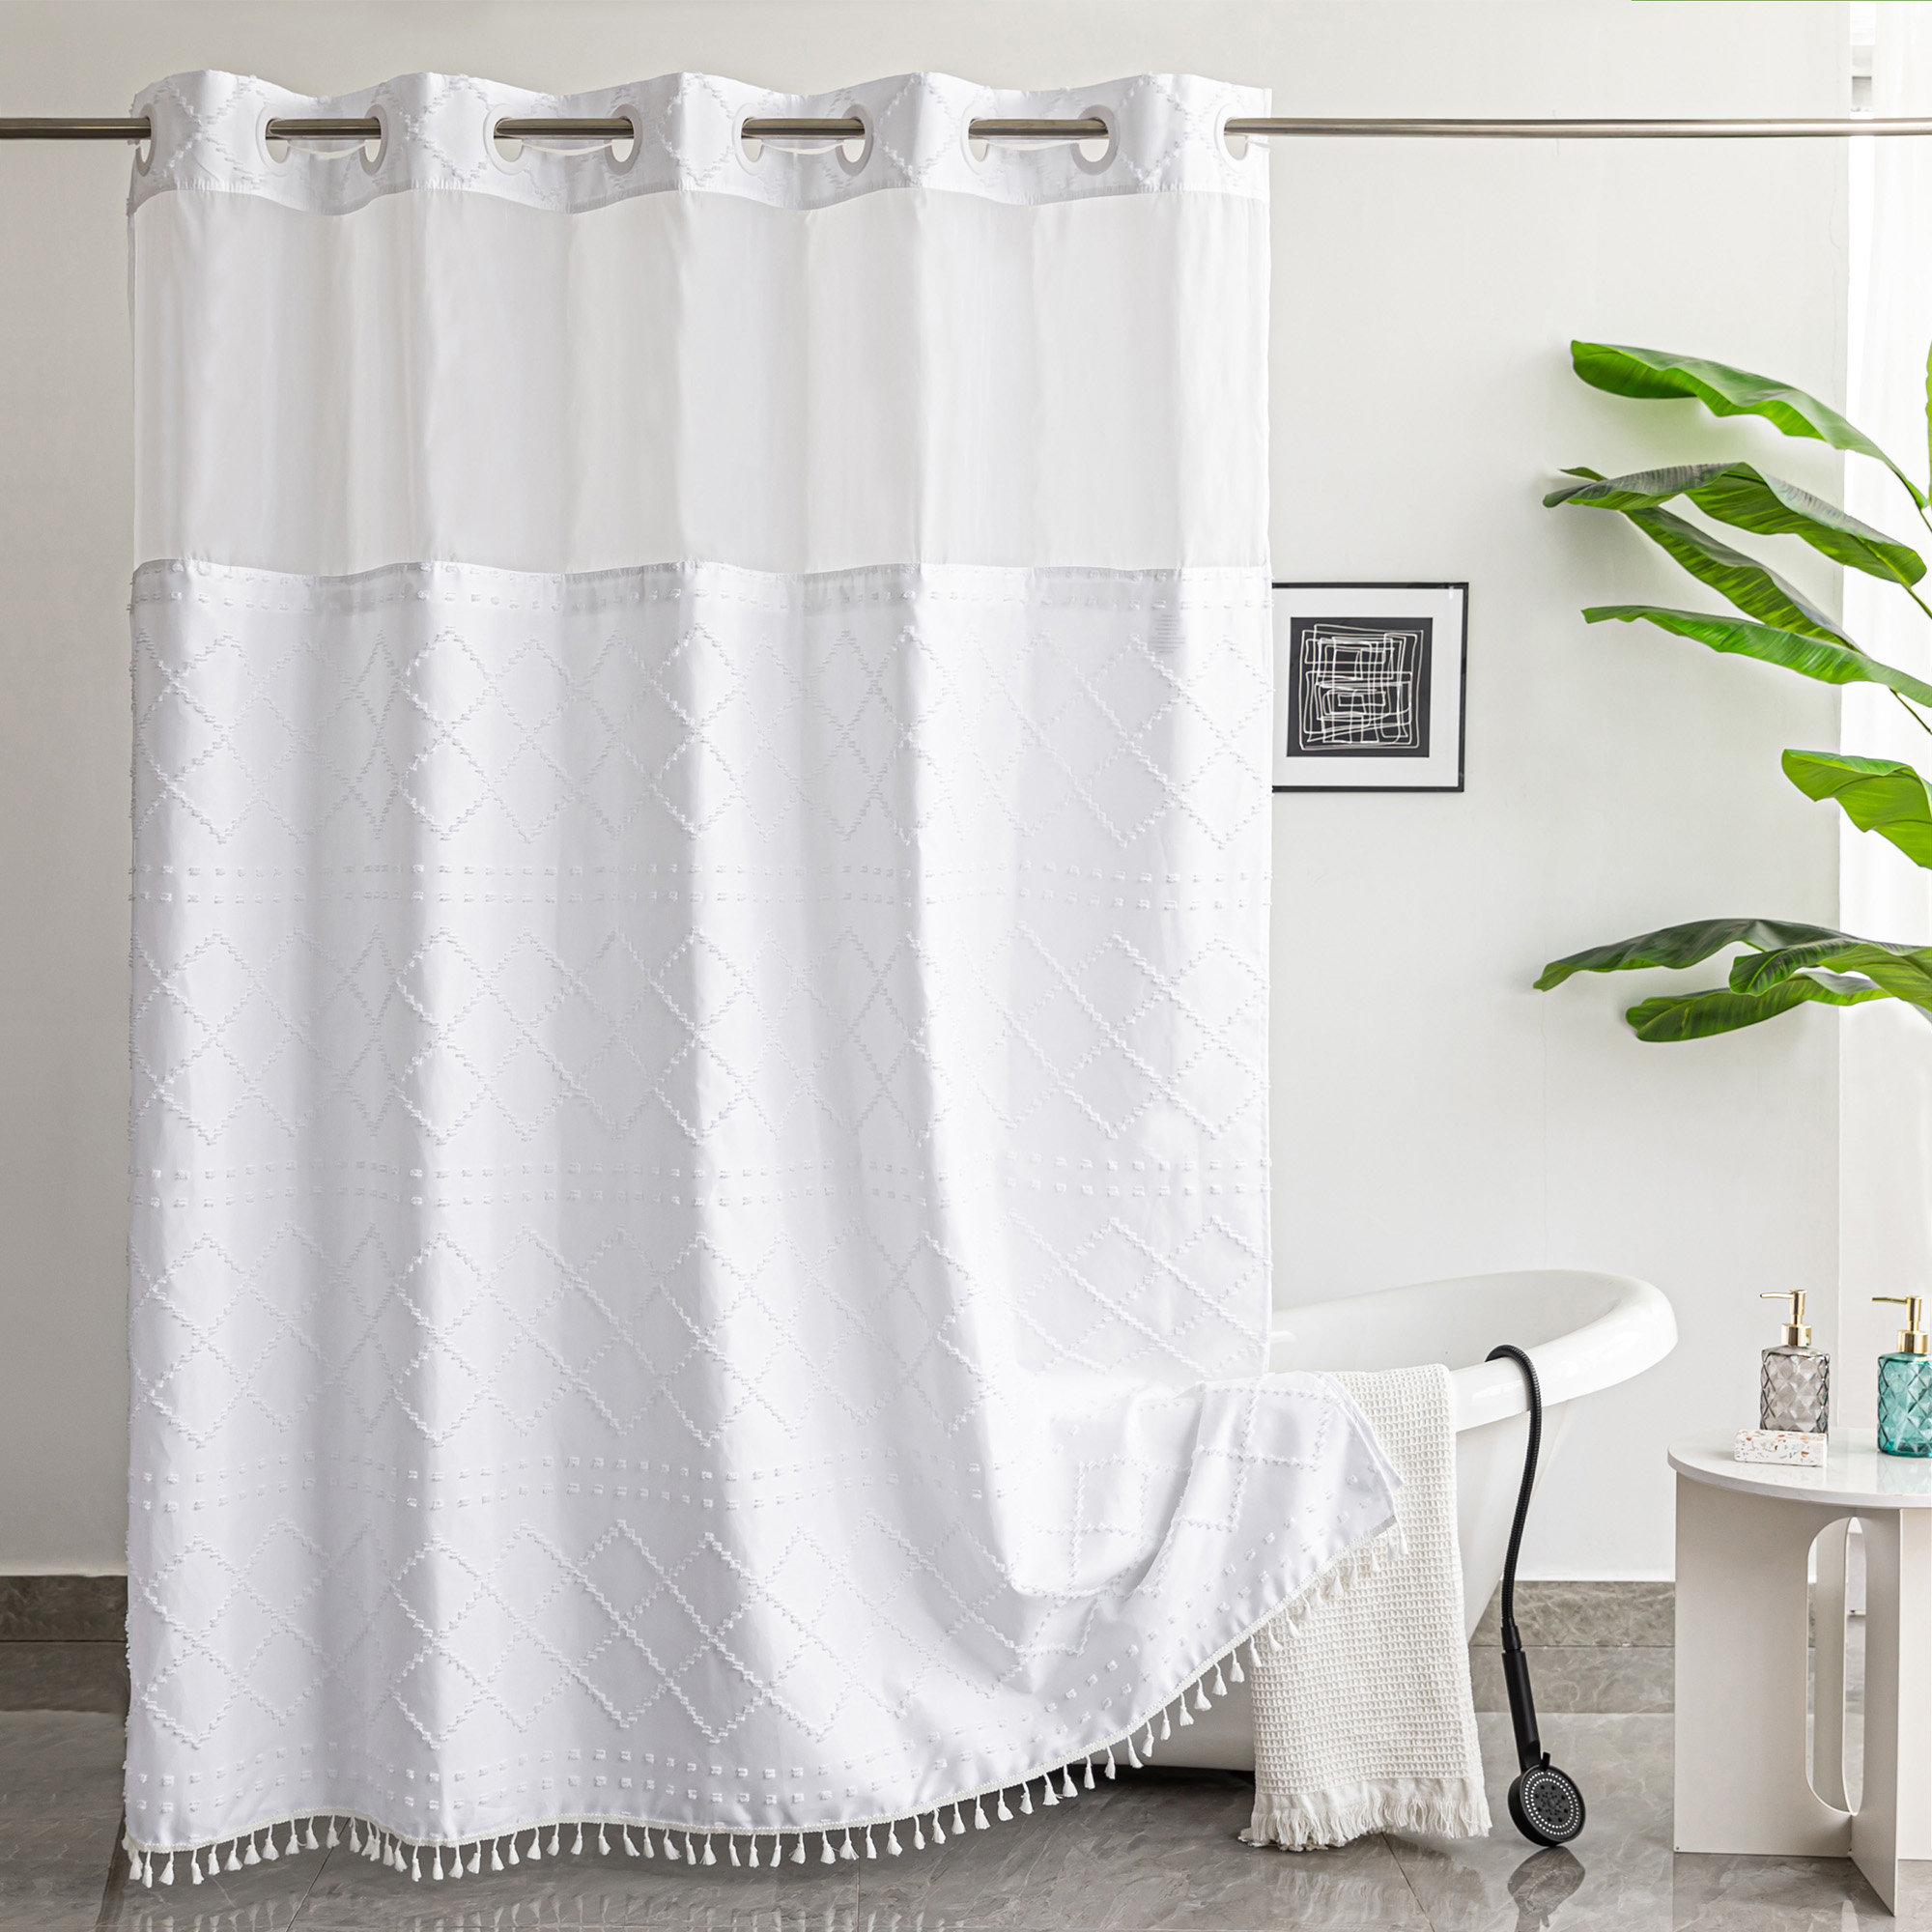 Upgrade Your Shower Game with Hookless Snap Fabric Shower Curtain Liner, by Bath Access